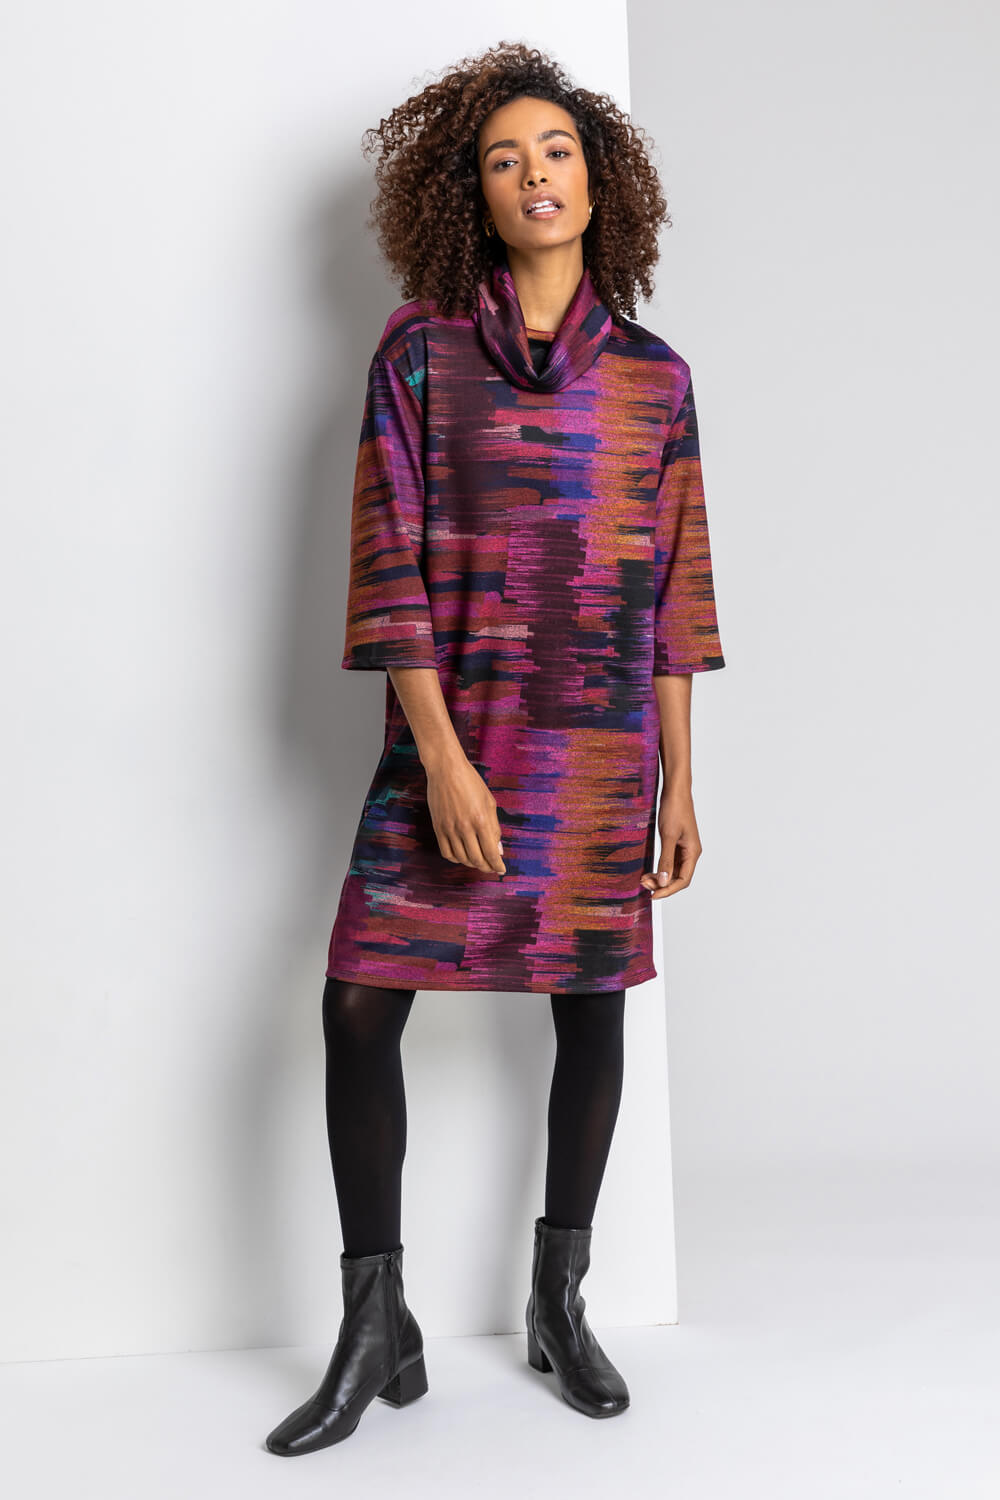 Purple Abstract Print Cowl Neck Dress, Image 2 of 4